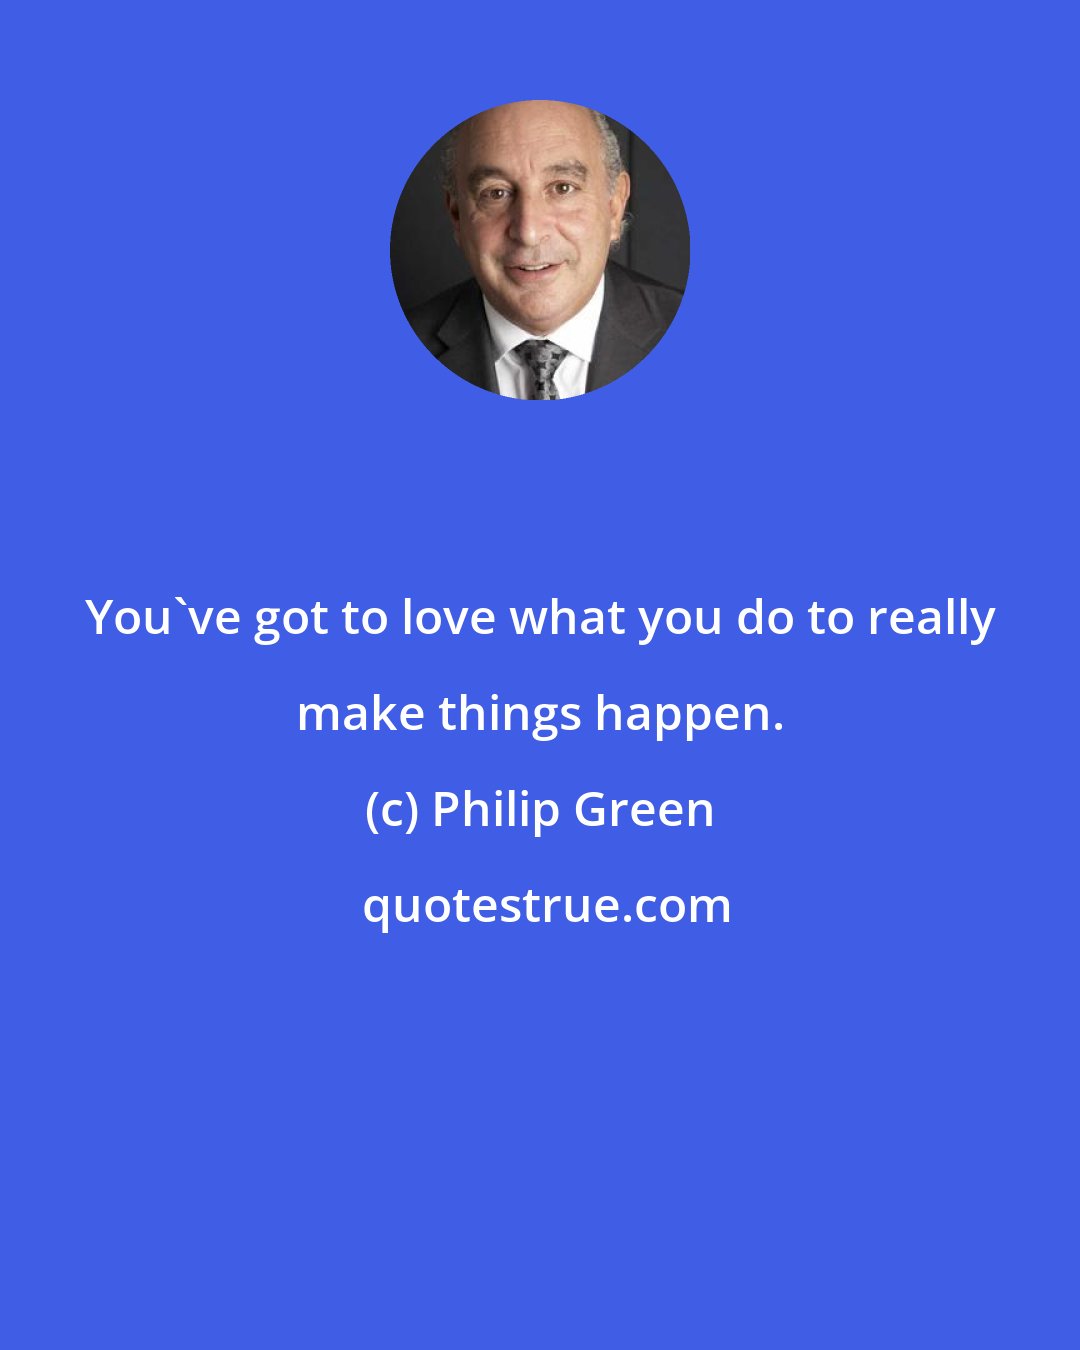 Philip Green: You've got to love what you do to really make things happen.